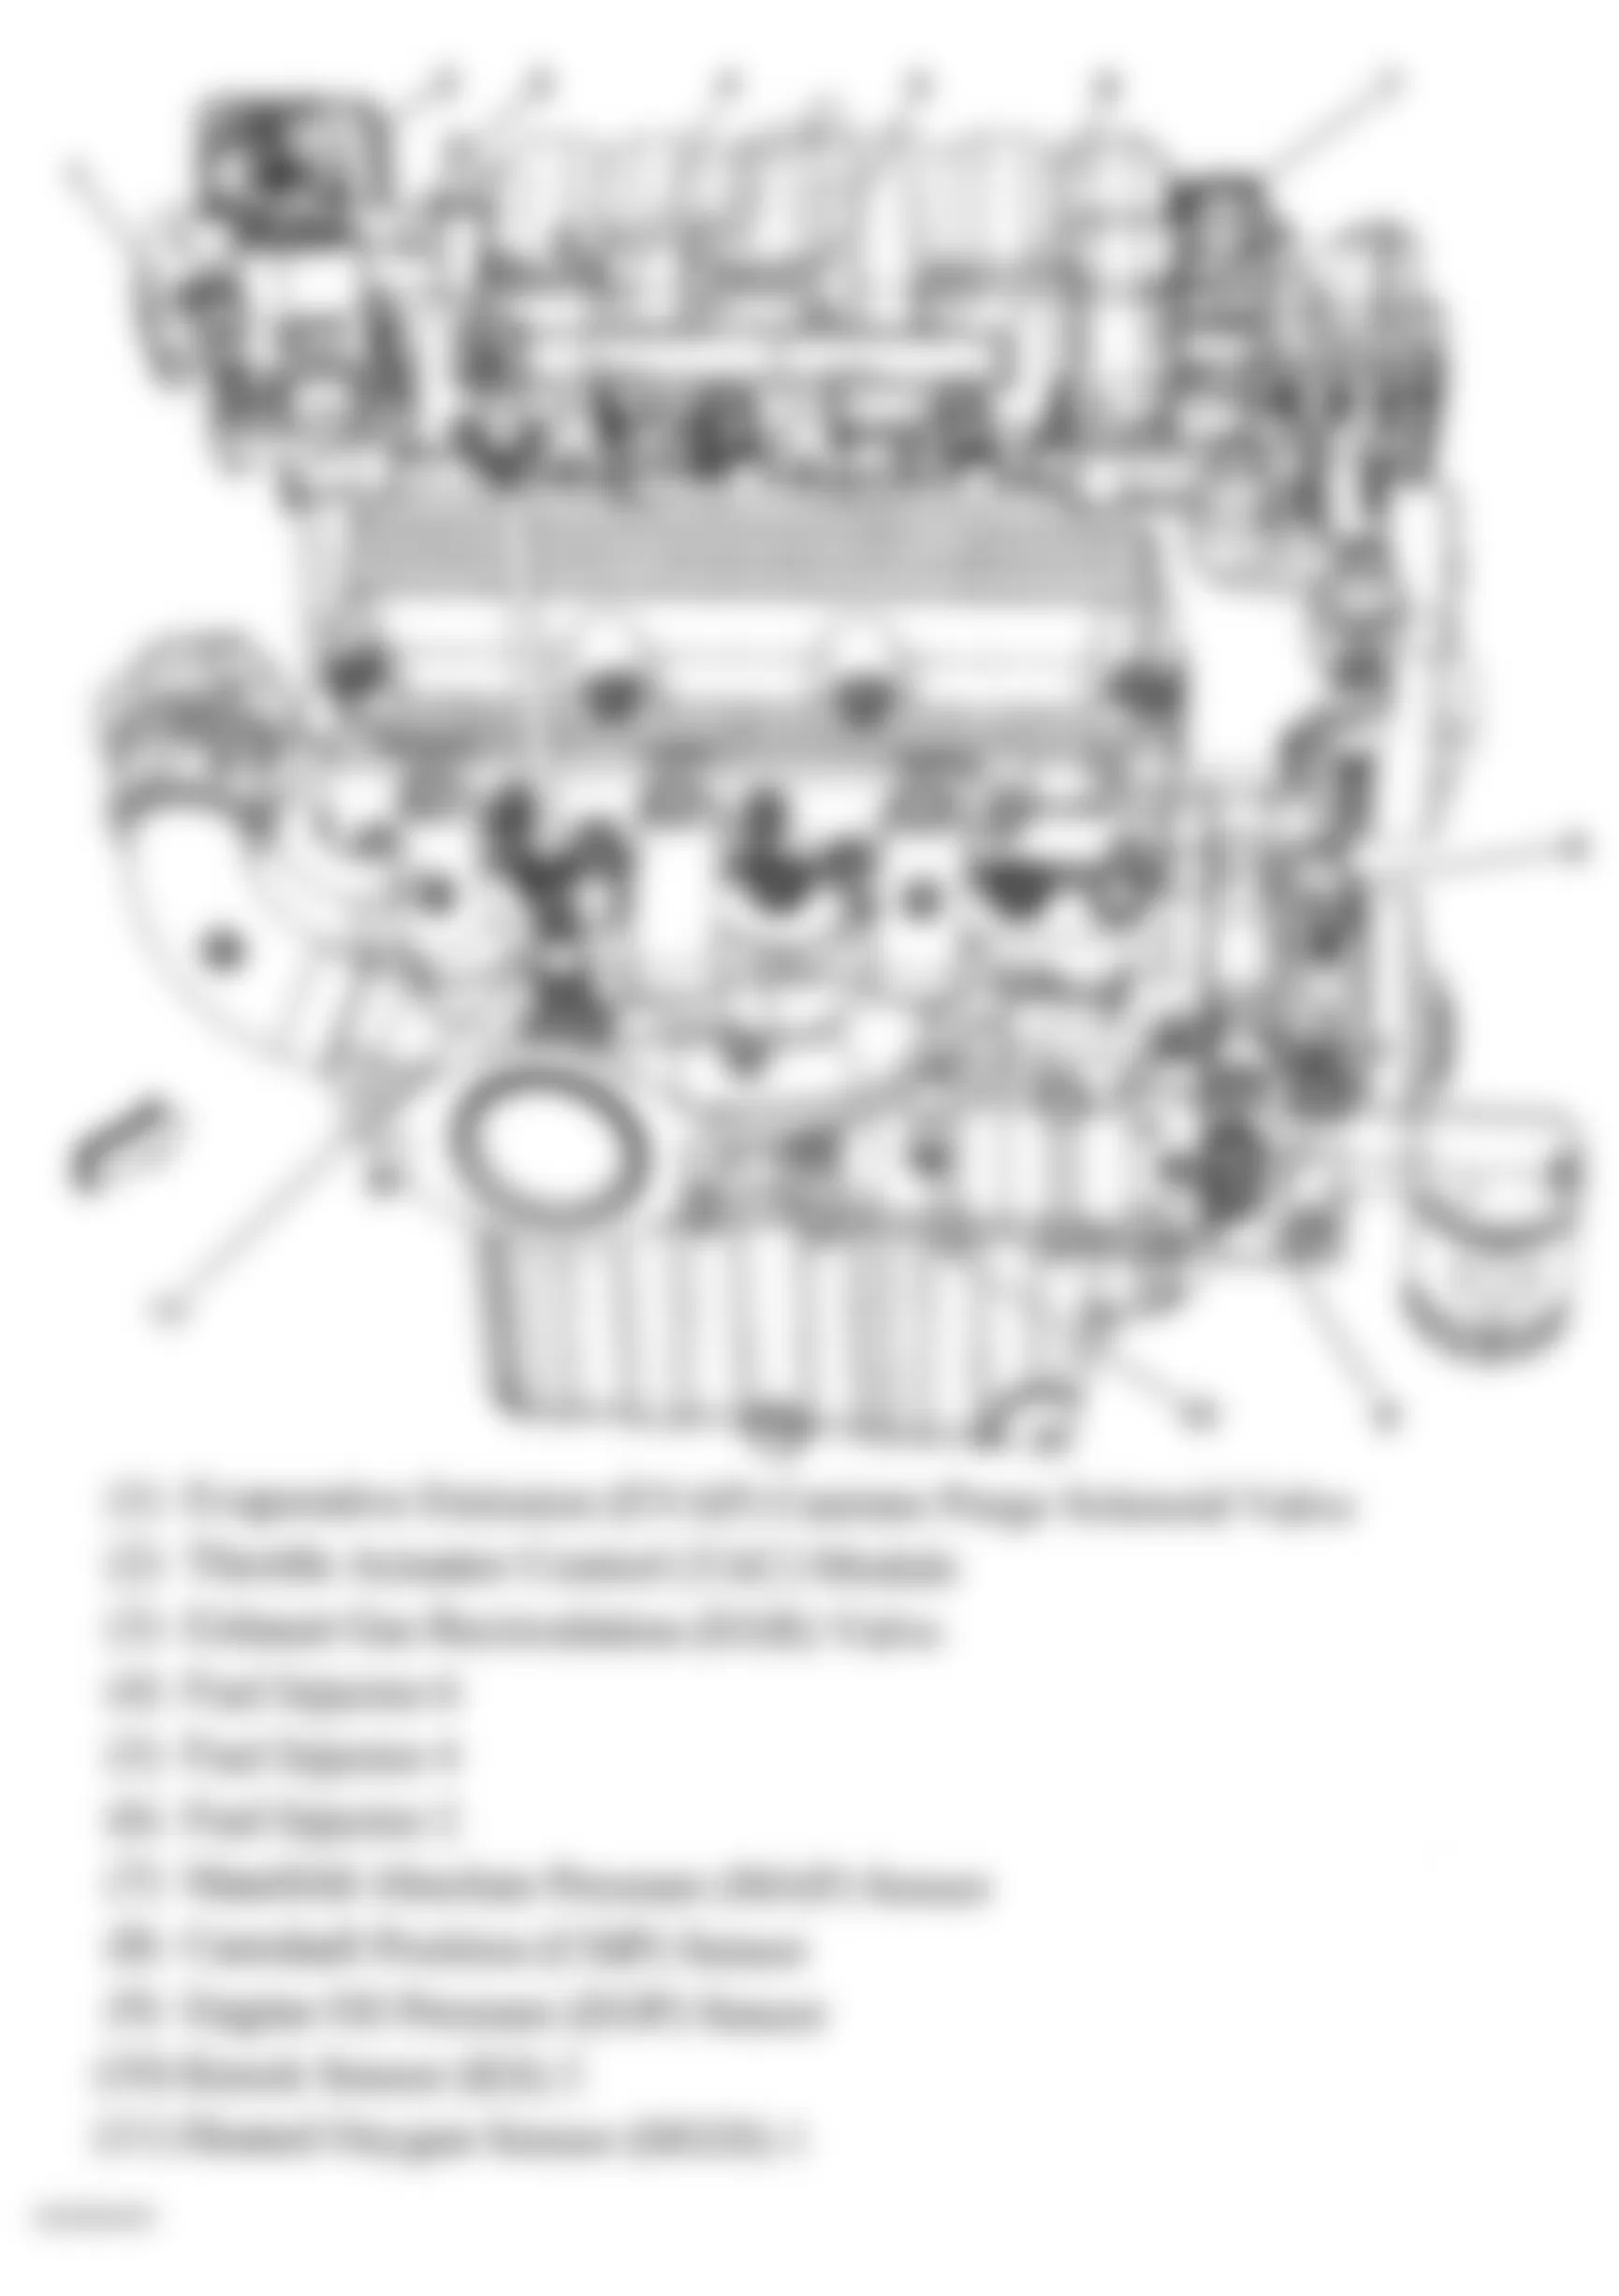 Buick Allure CXS 2005 - Component Locations -  Right Side Of Engine (3.8L)